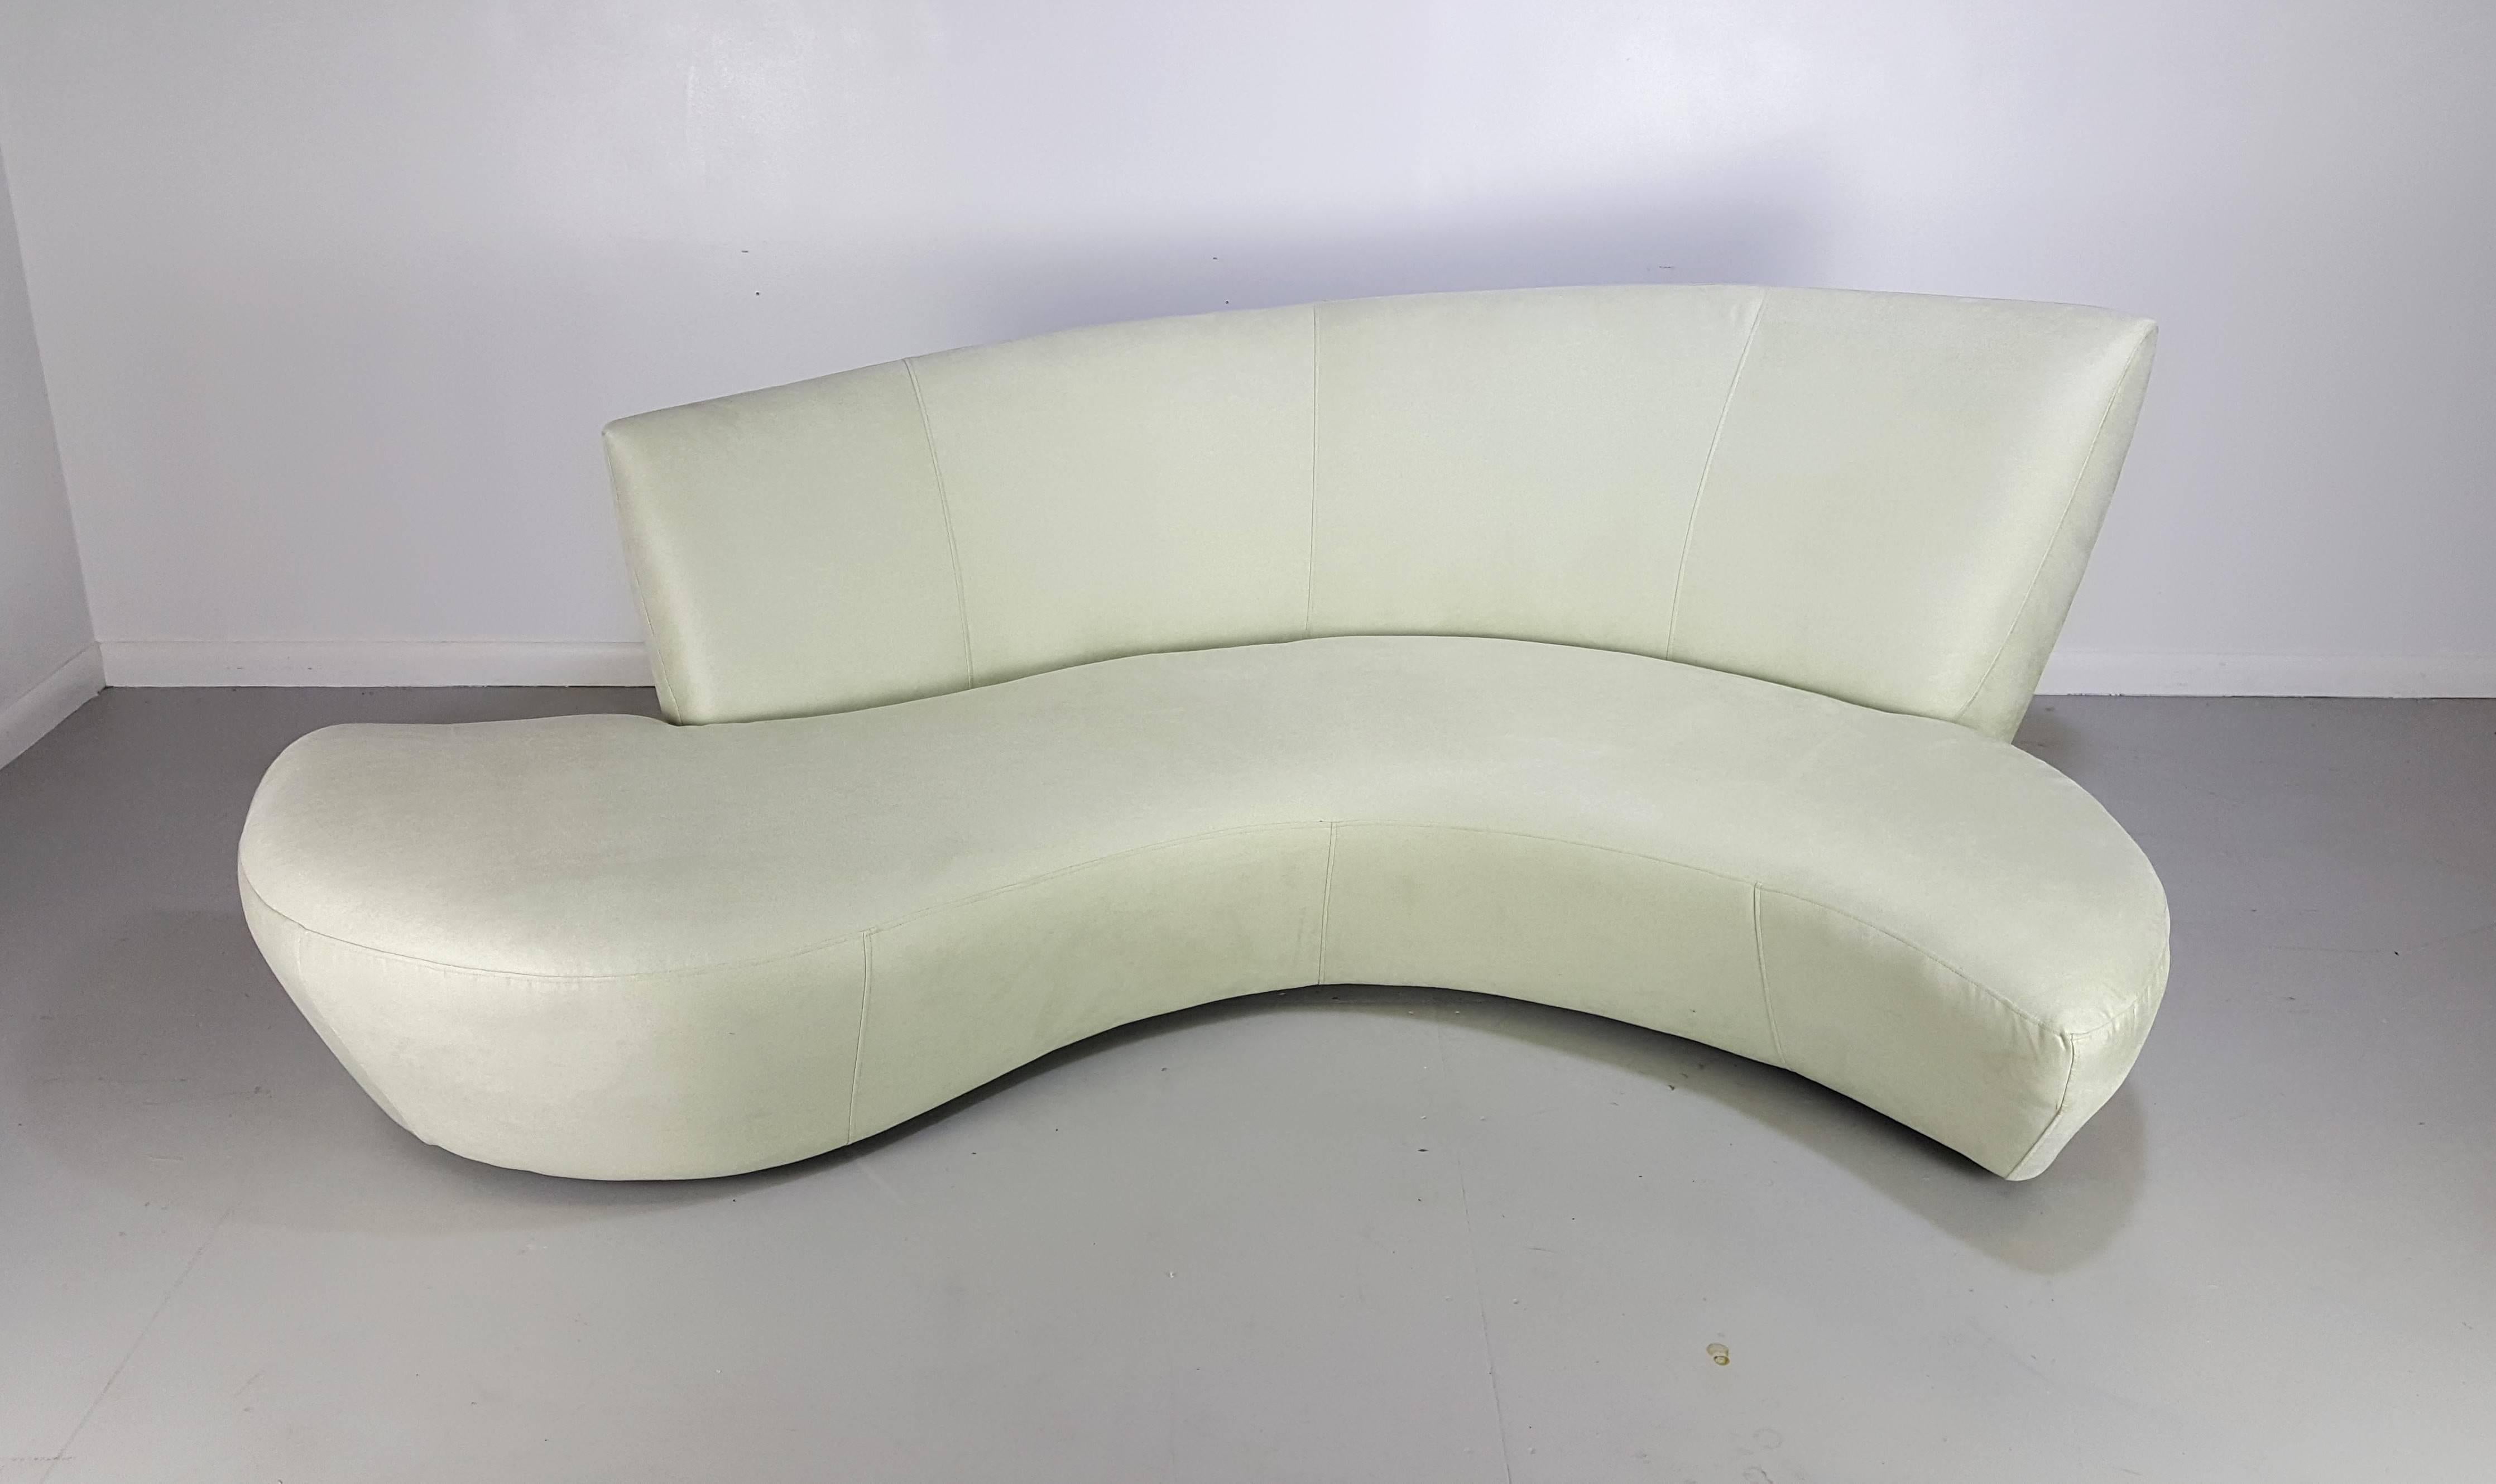 Sculptural Bilbao sofa by Vladimir Kagan in Ultrasuede, 1970s. Newly reupholstered. Color reads as a neutral cream with a pale green cast.  

See this item in our private NYC showroom! Refine Limited is located in the heart of Chelsea at the history